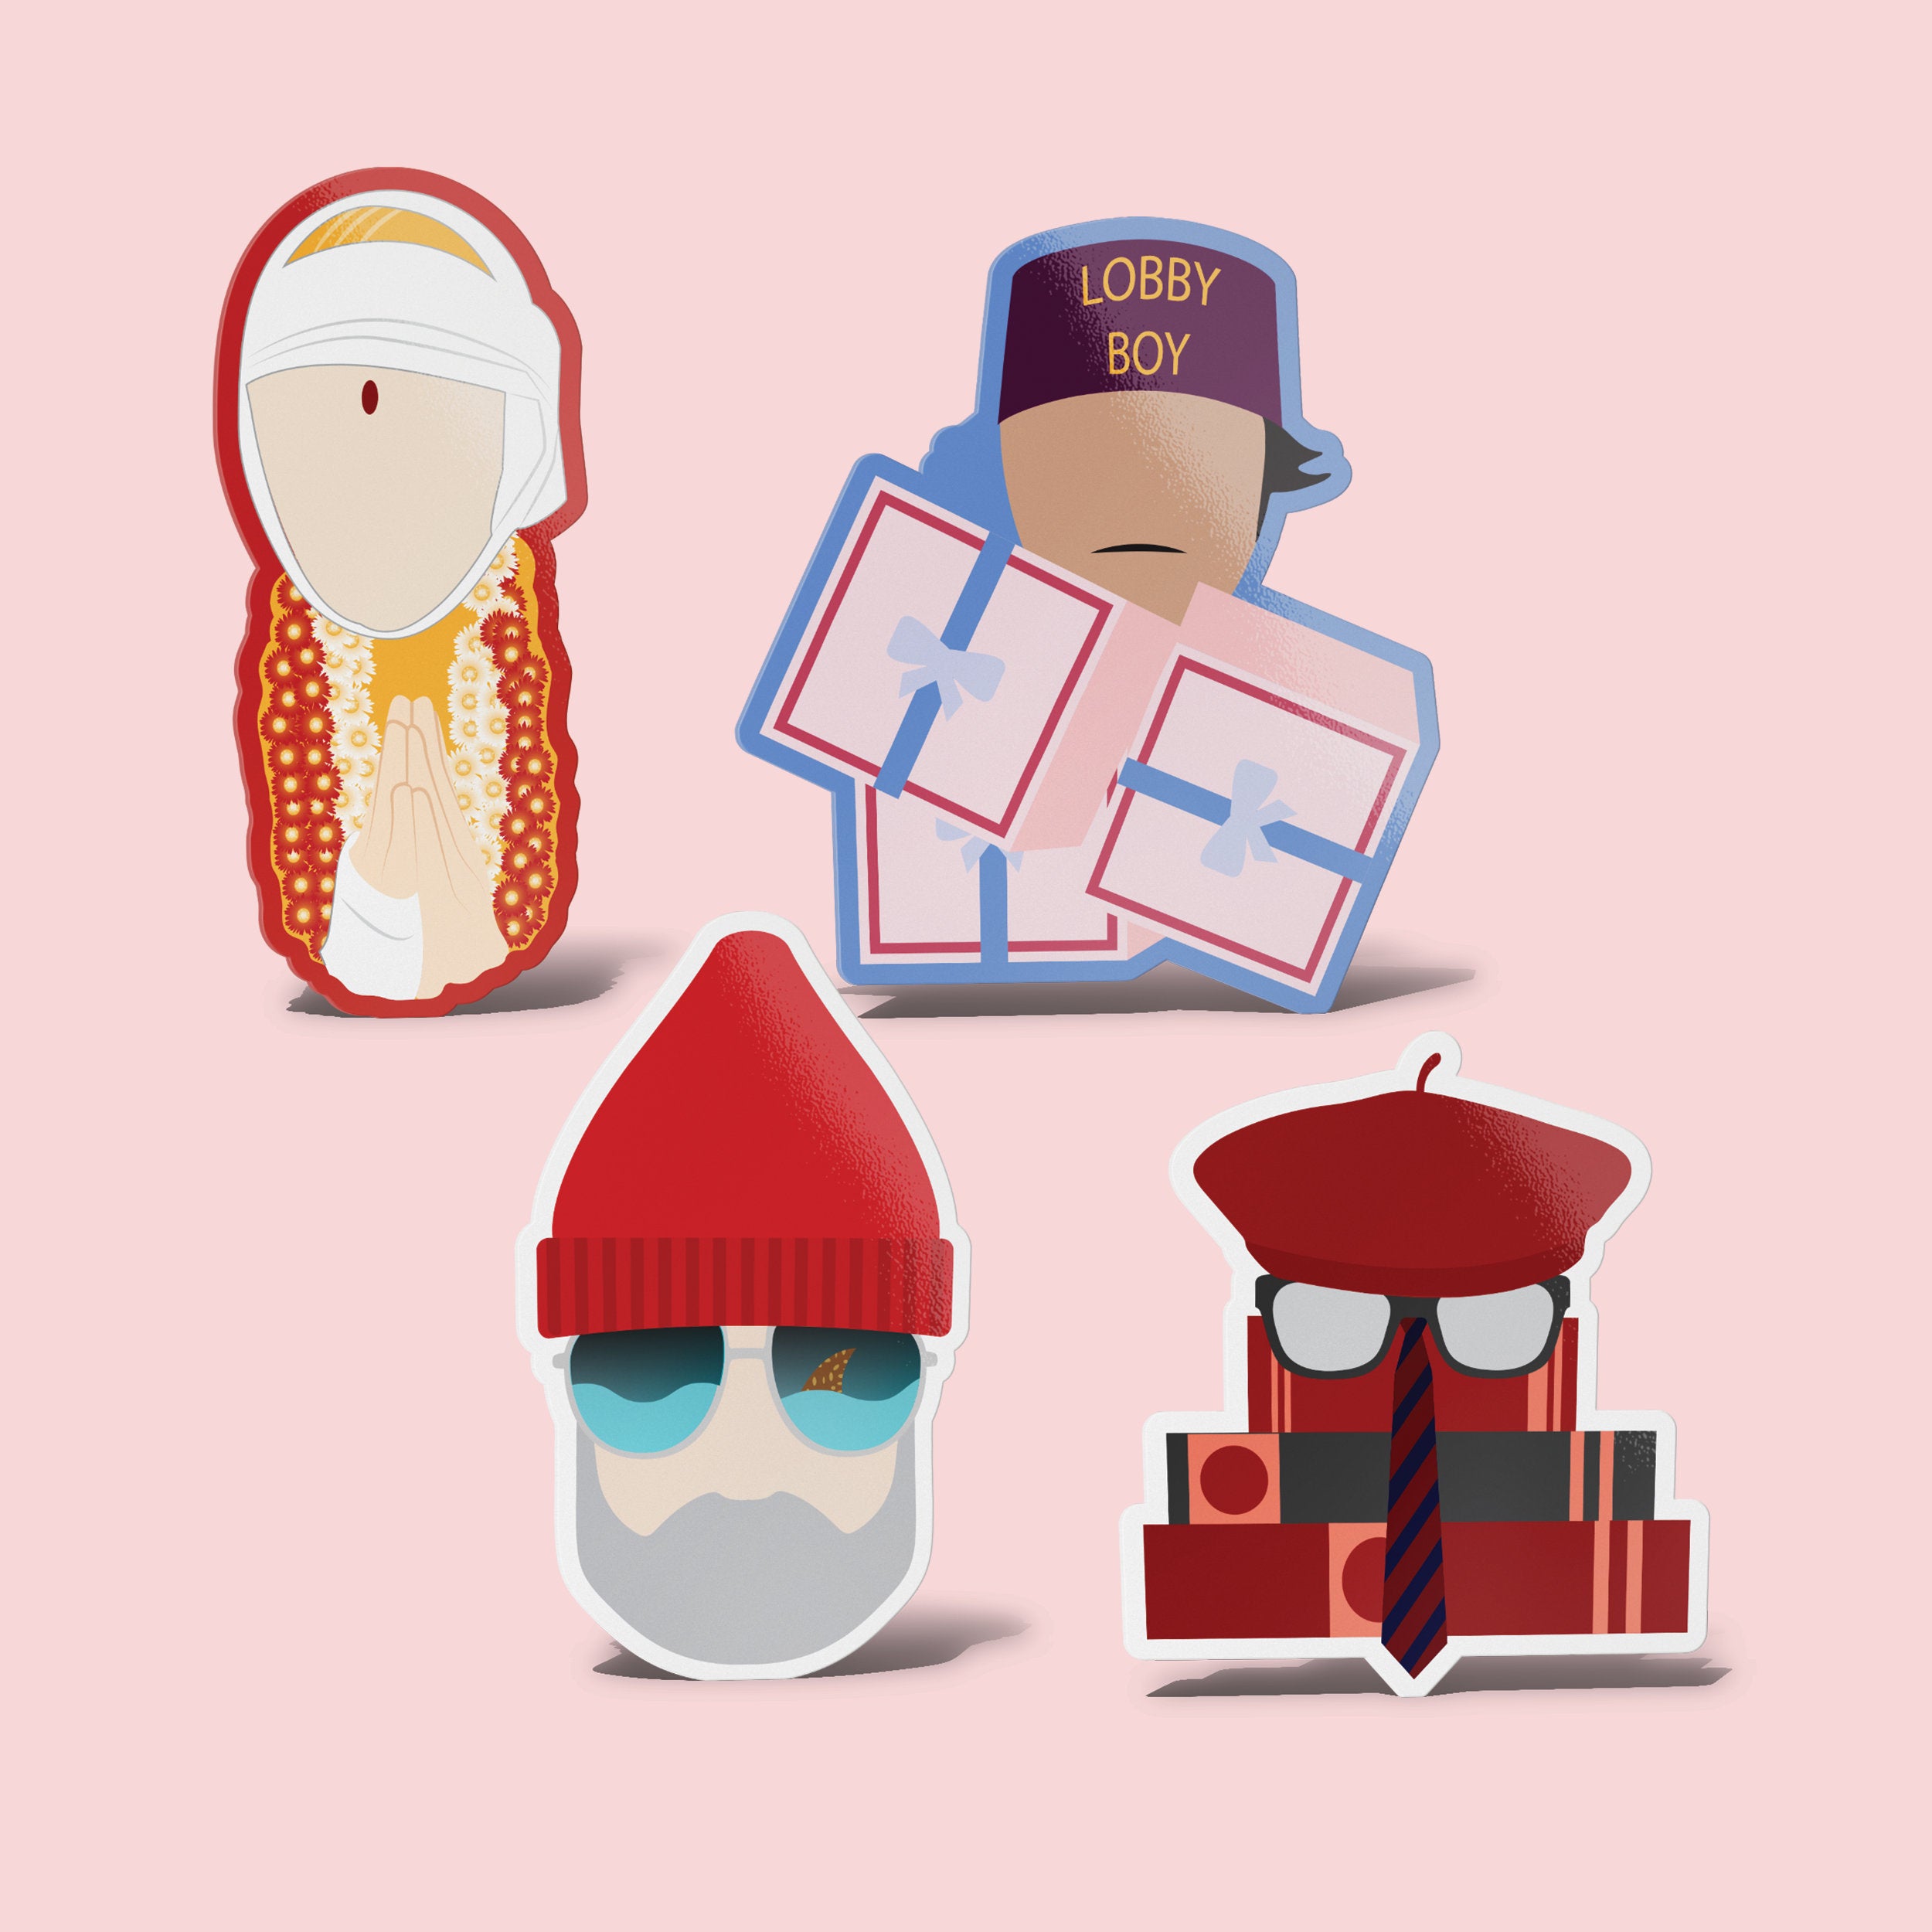 Wes Anderson-Inspired Vinyl Sticker Pack